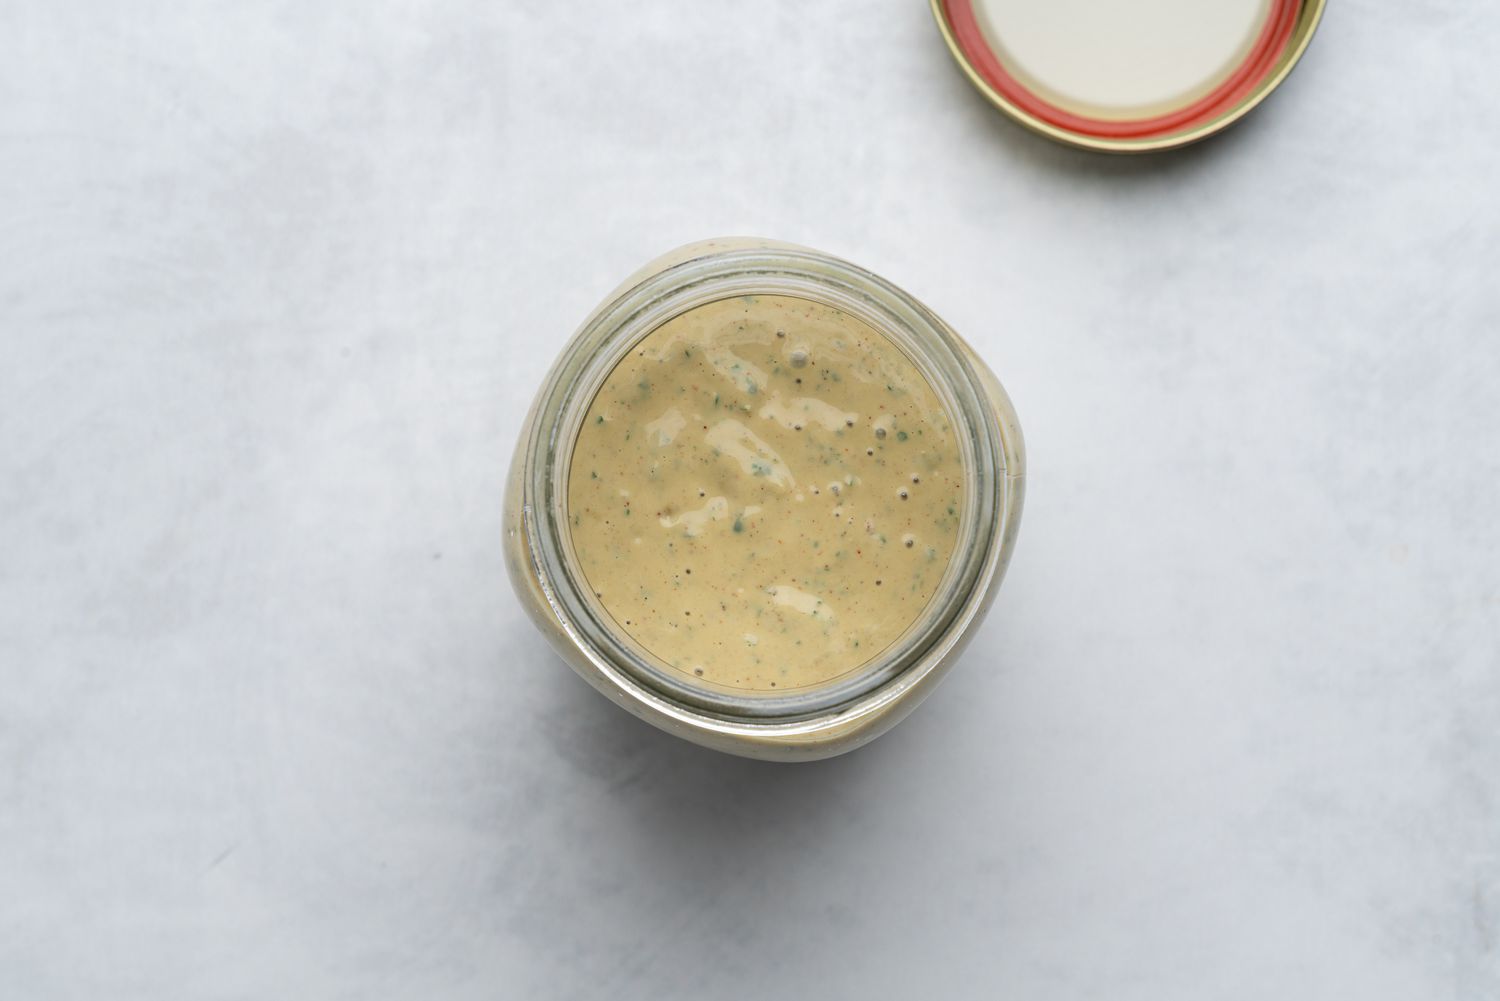 Chick-fil-a Avocado Lime Ranch Dressing in a jar